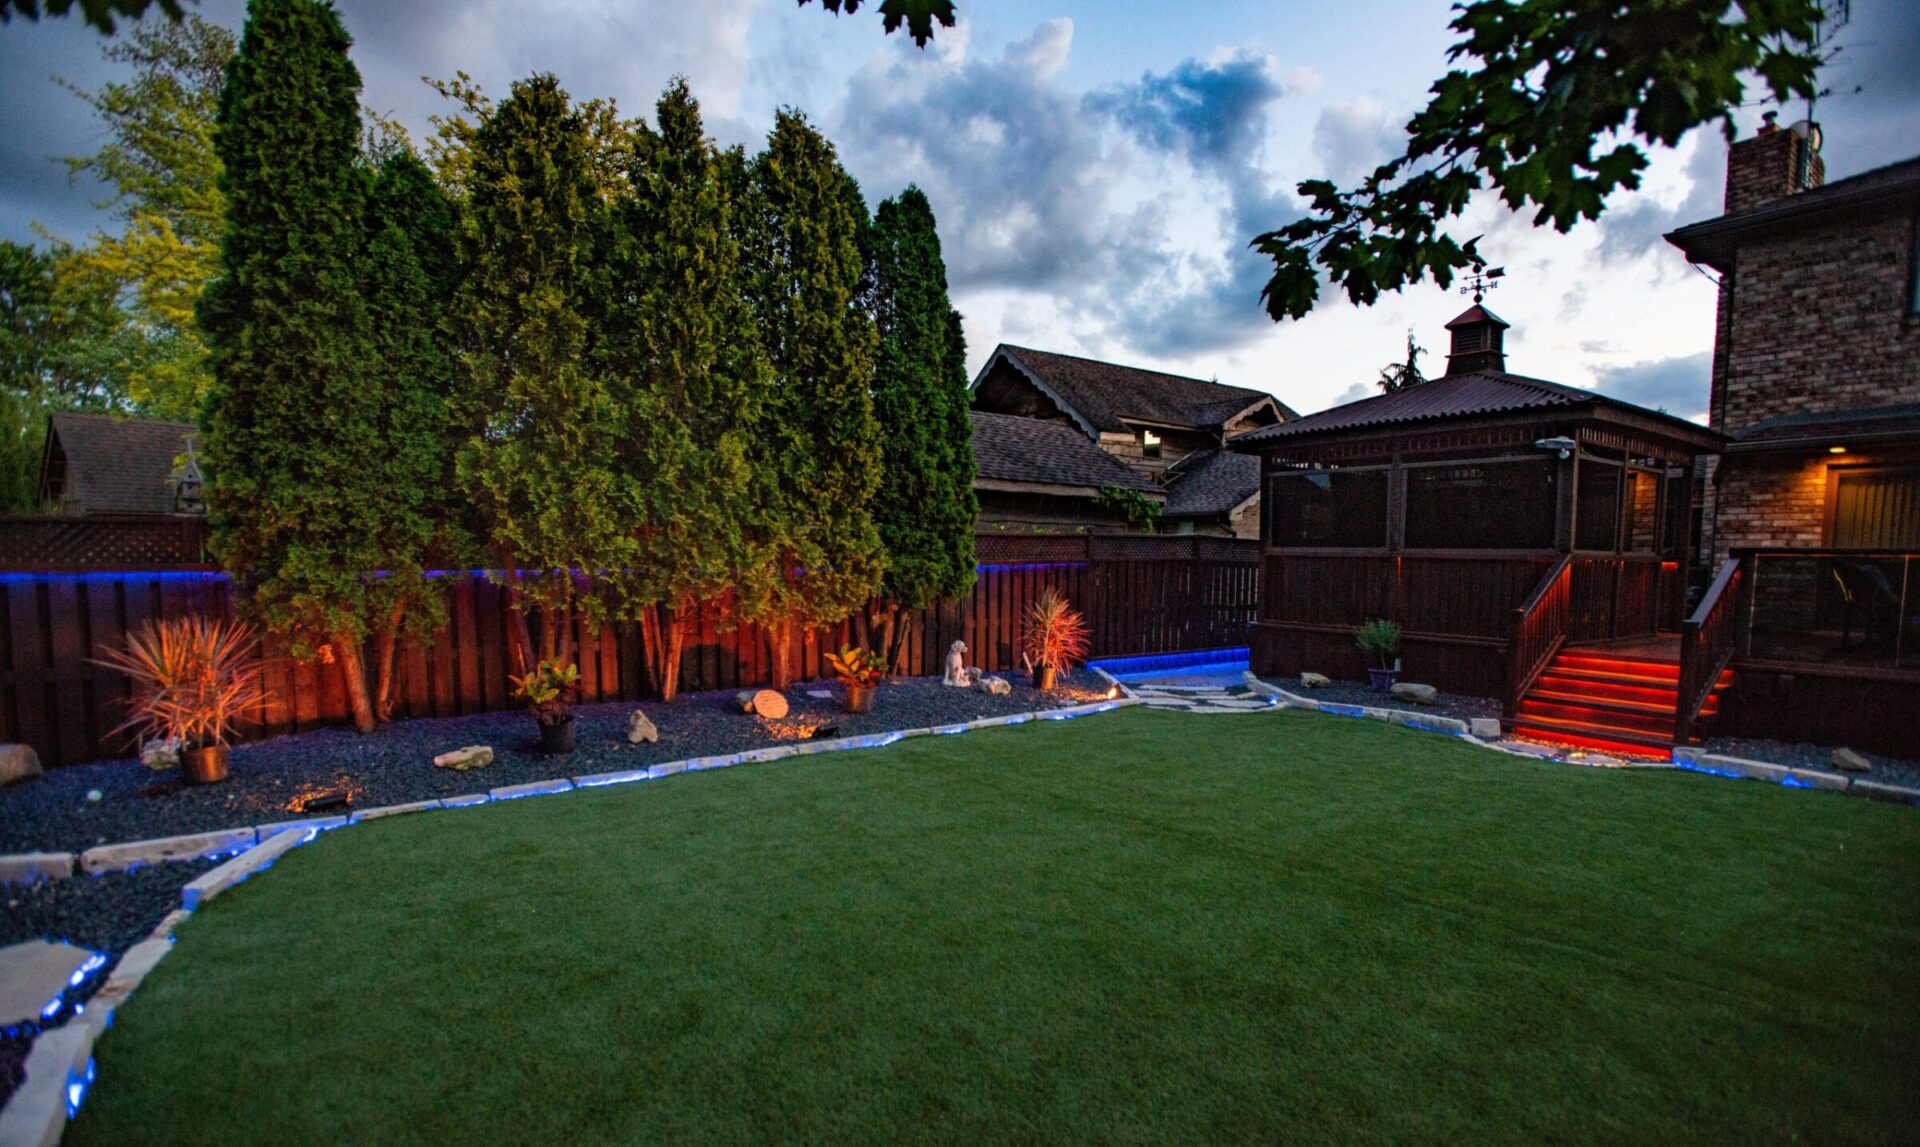 This image features a well-manicured backyard at dusk with a lush green lawn, decorative lighting, trees, a rock garden, and a screened patio area.